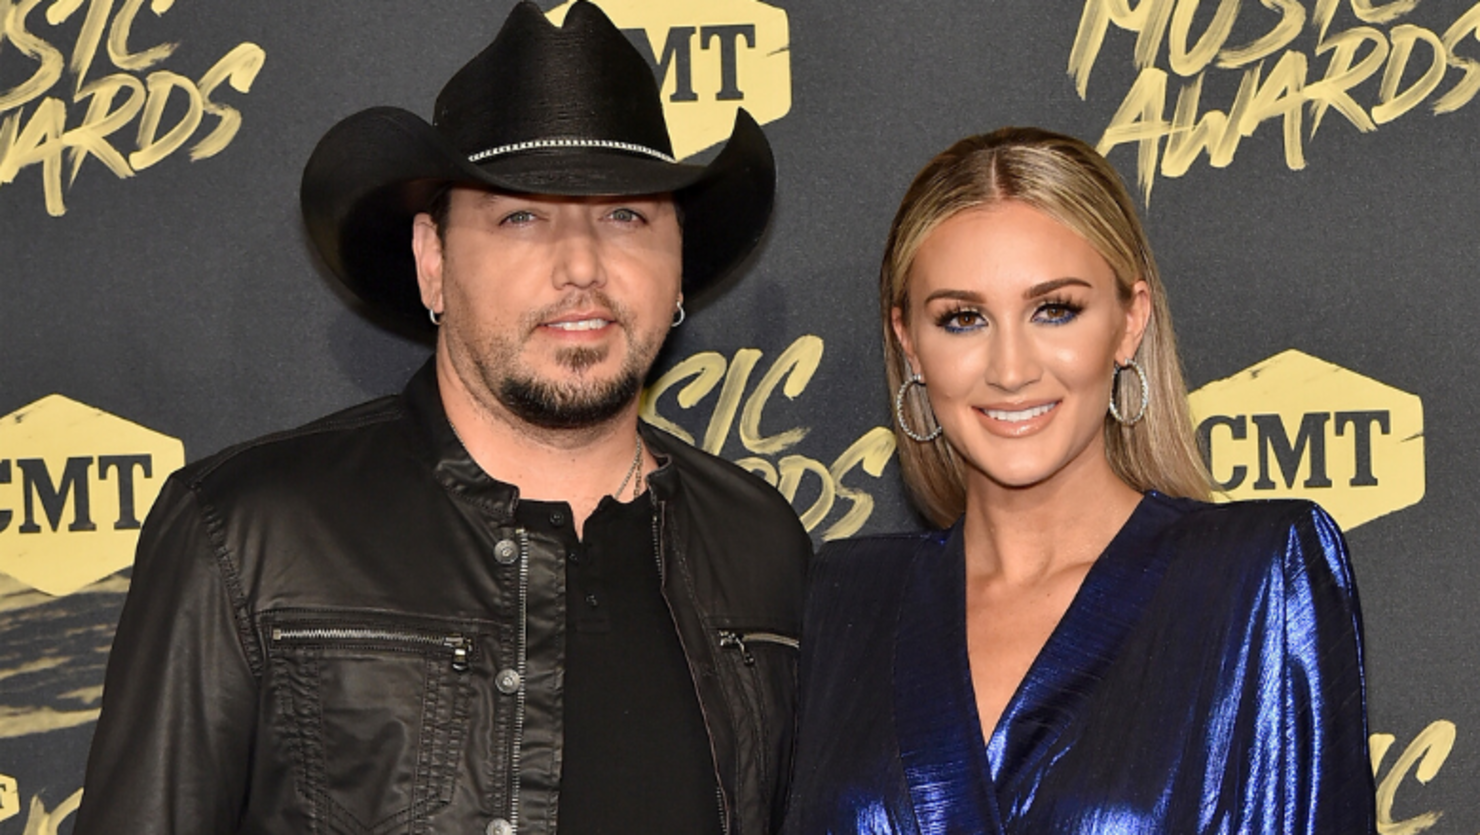 Jason Aldean's Wife And Family Star In New 'Got What I Got' Music Video